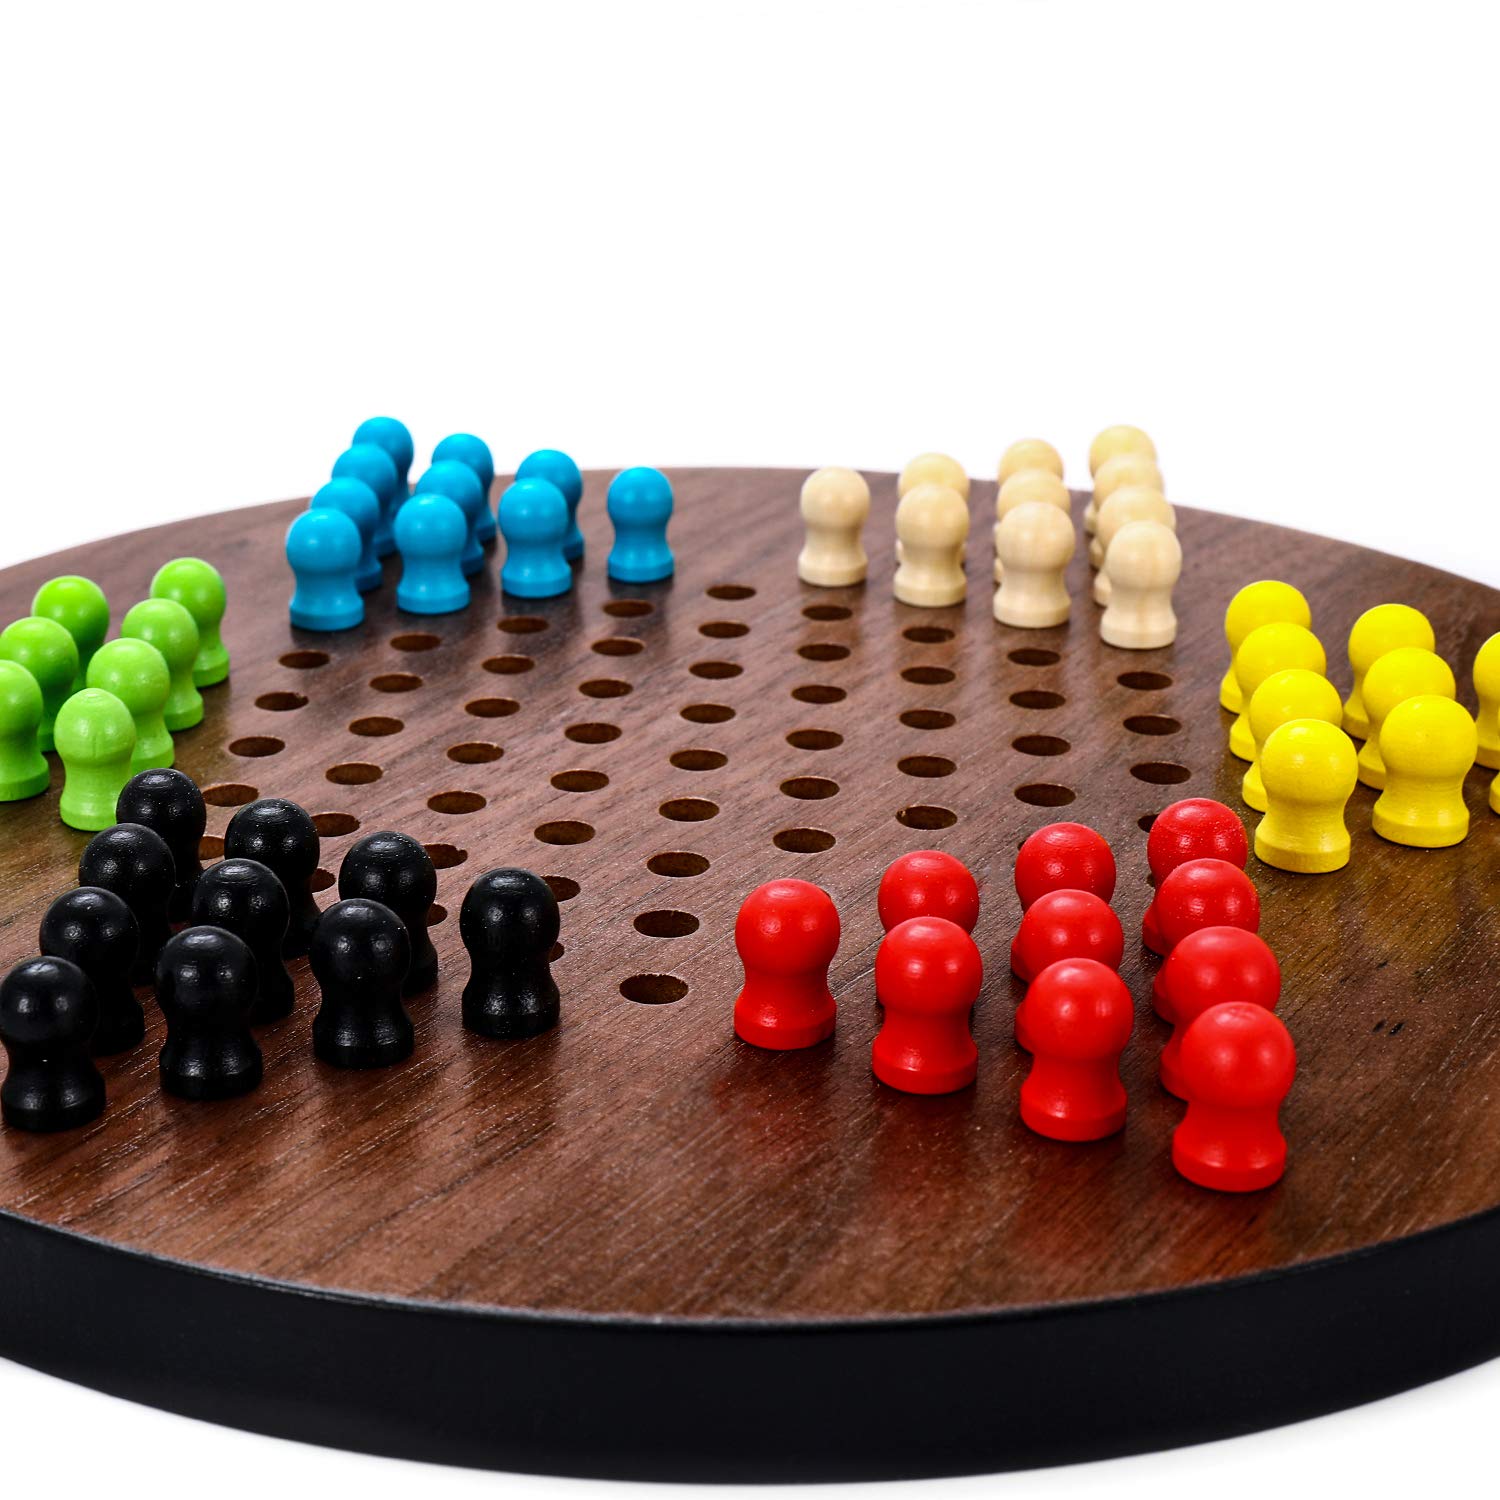 STERLING Games Wooden Chinese Checkers 11.5 Inch Family Board Game for Kids and Adults